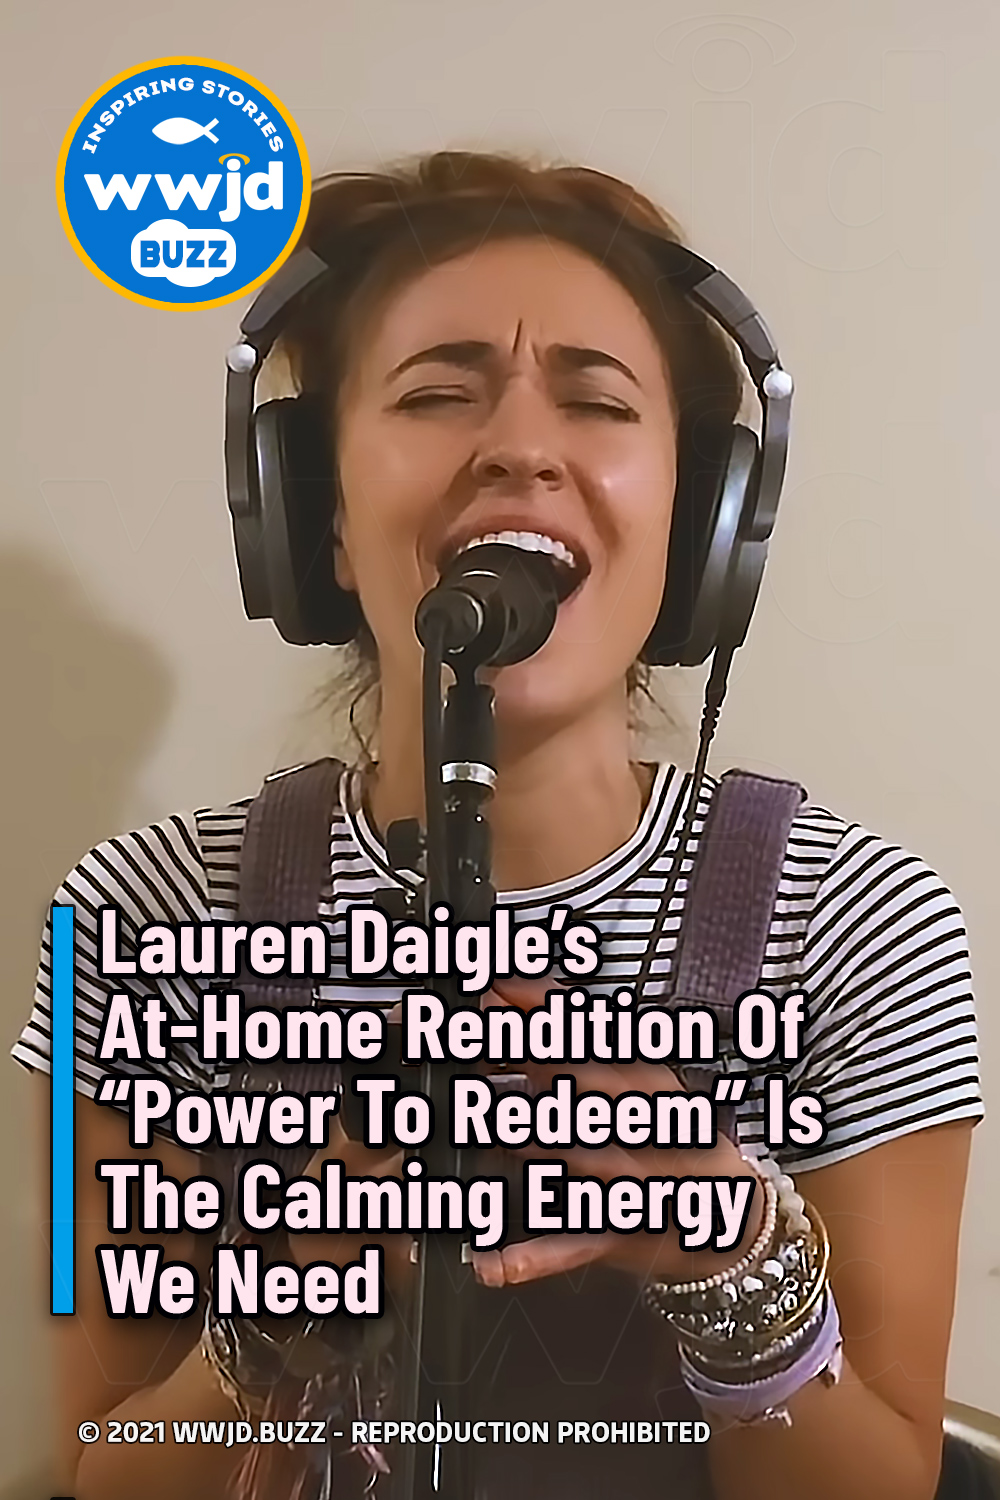 Lauren Daigle’s At-Home Rendition Of “Power To Redeem” Is The Calming Energy We Need